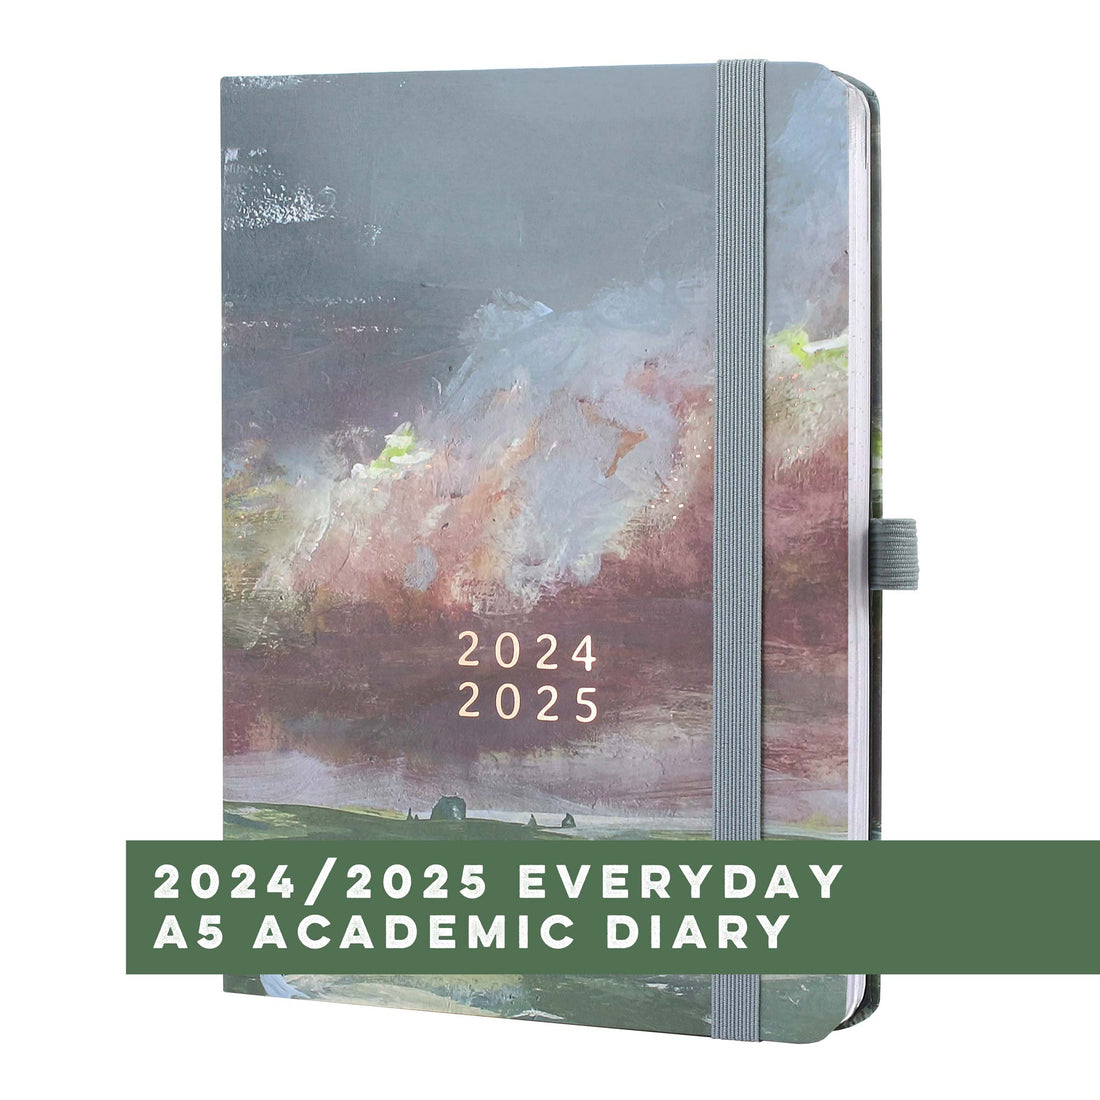 Boxclever Press Everyday Academic A5 Diary 2024 2025 with cloud design